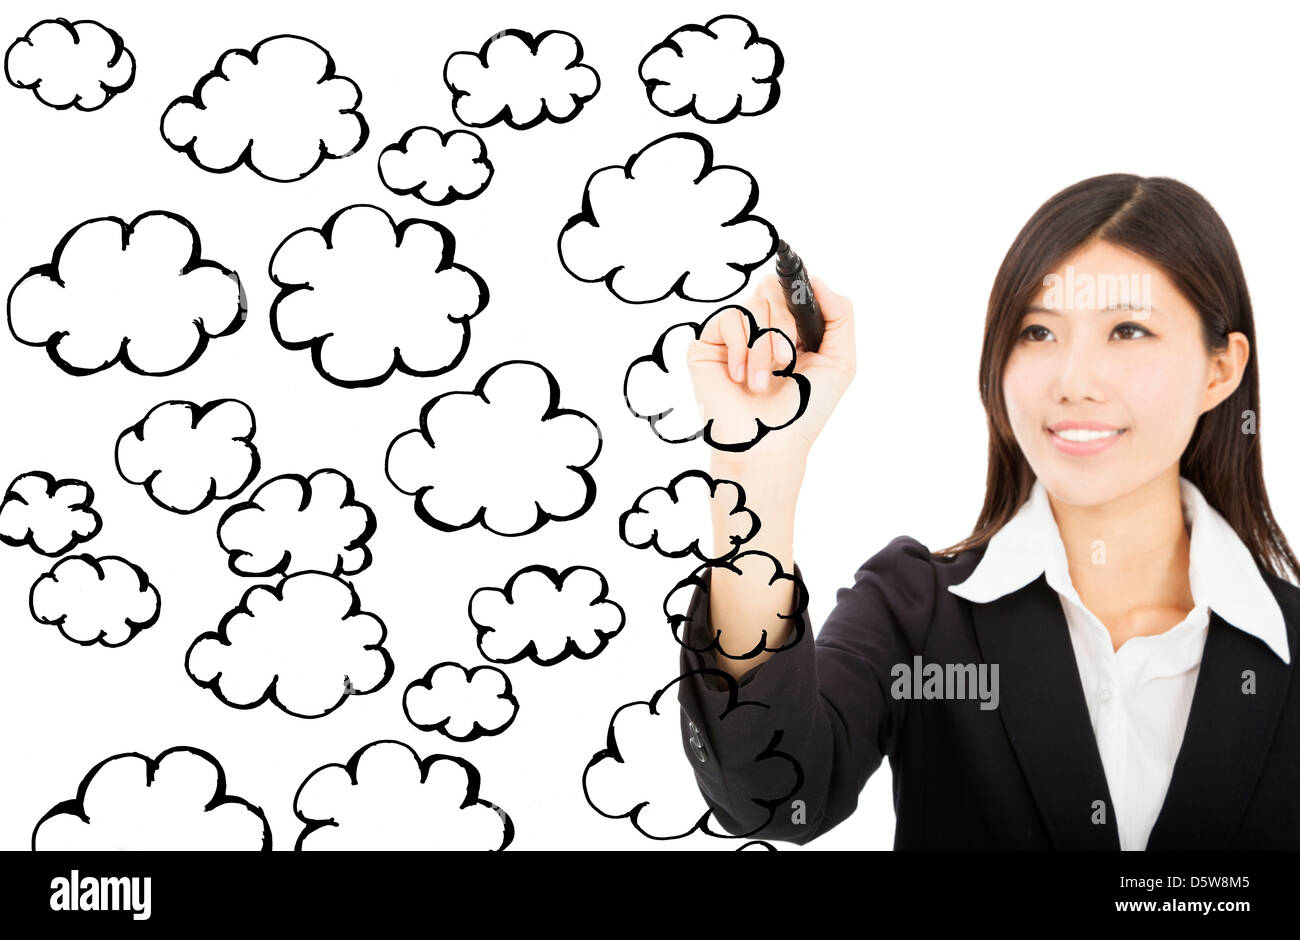 young businesswoman drawing cloud symbol diagram Stock Photo